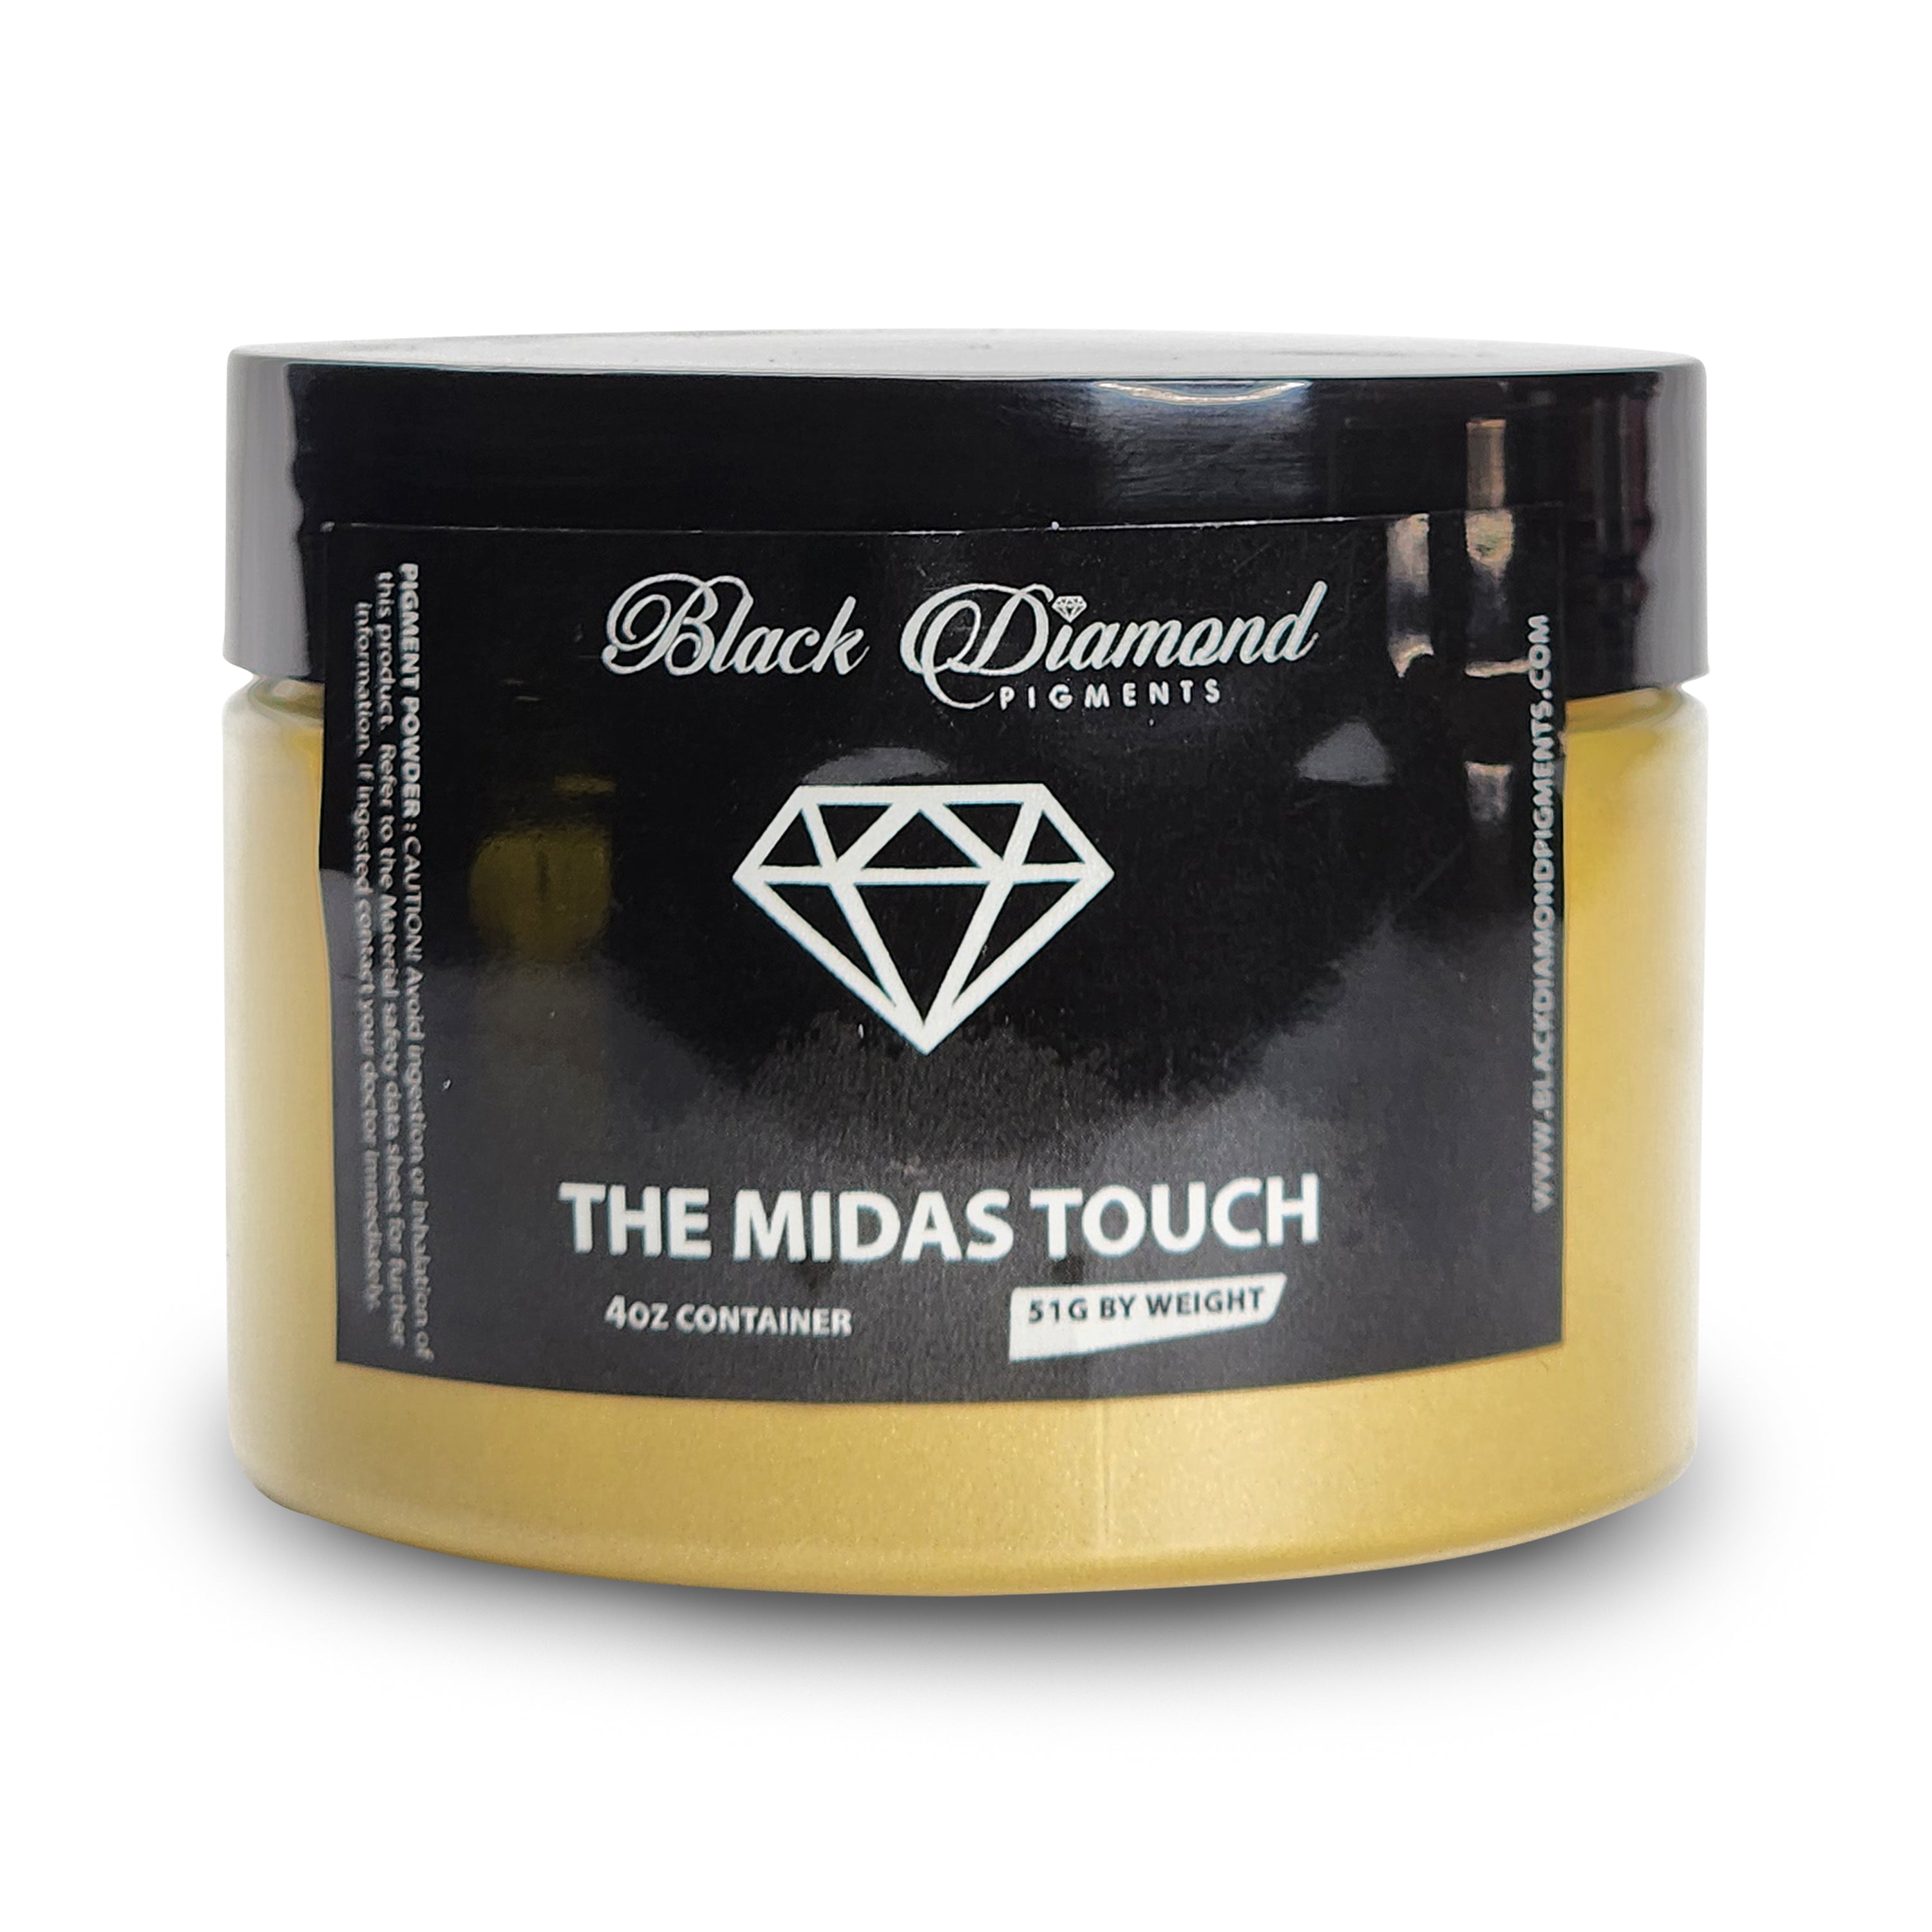 The Midas Touch - Professional grade mica powder pigment – The